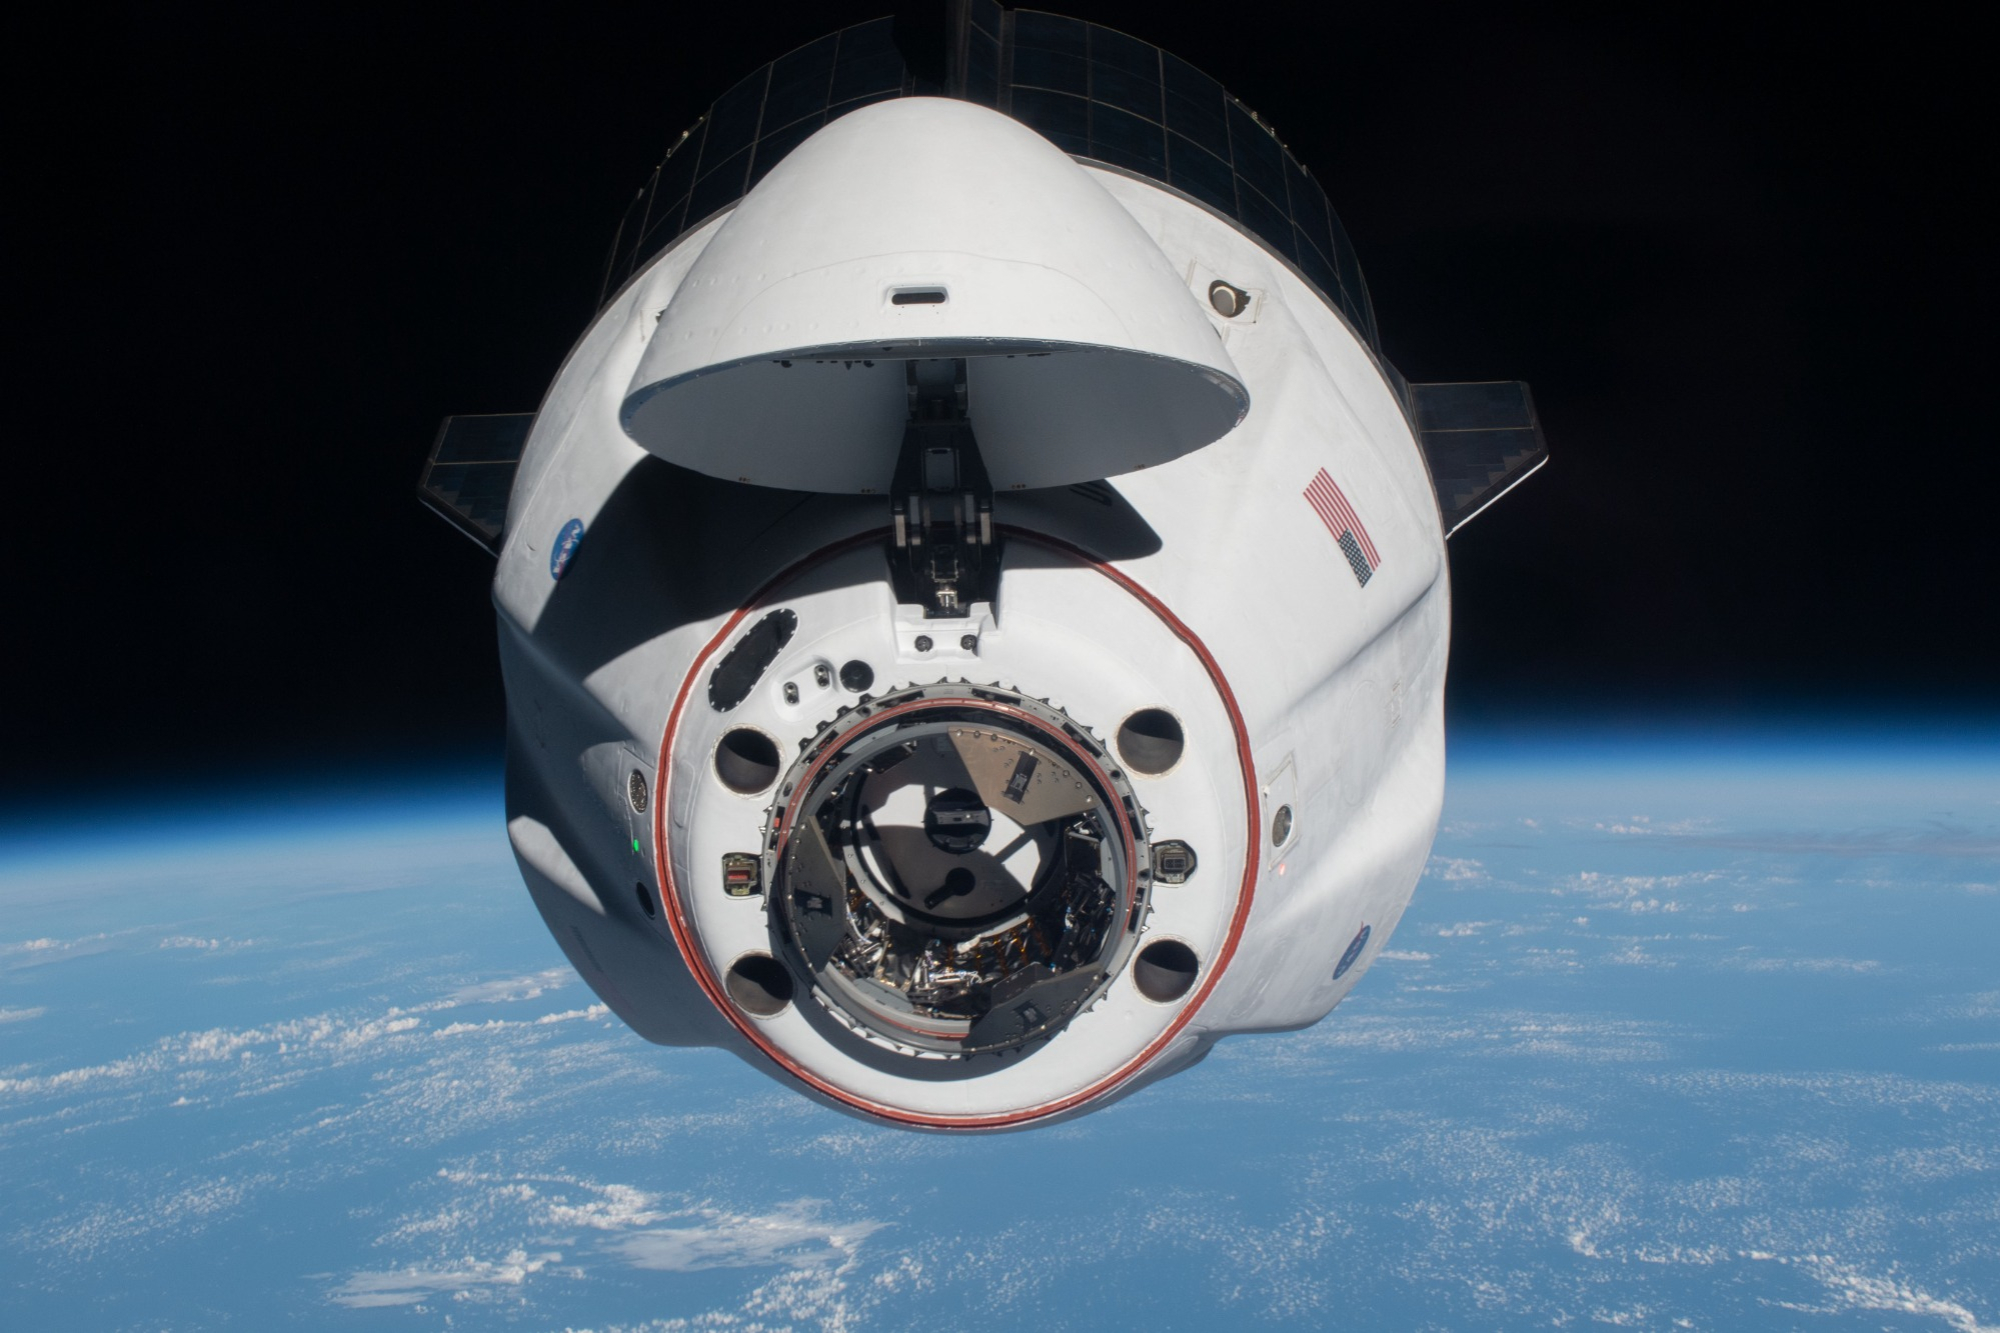 SpaceX Crew Dragon Endeavour as it approached the International Space Station in 2021.
